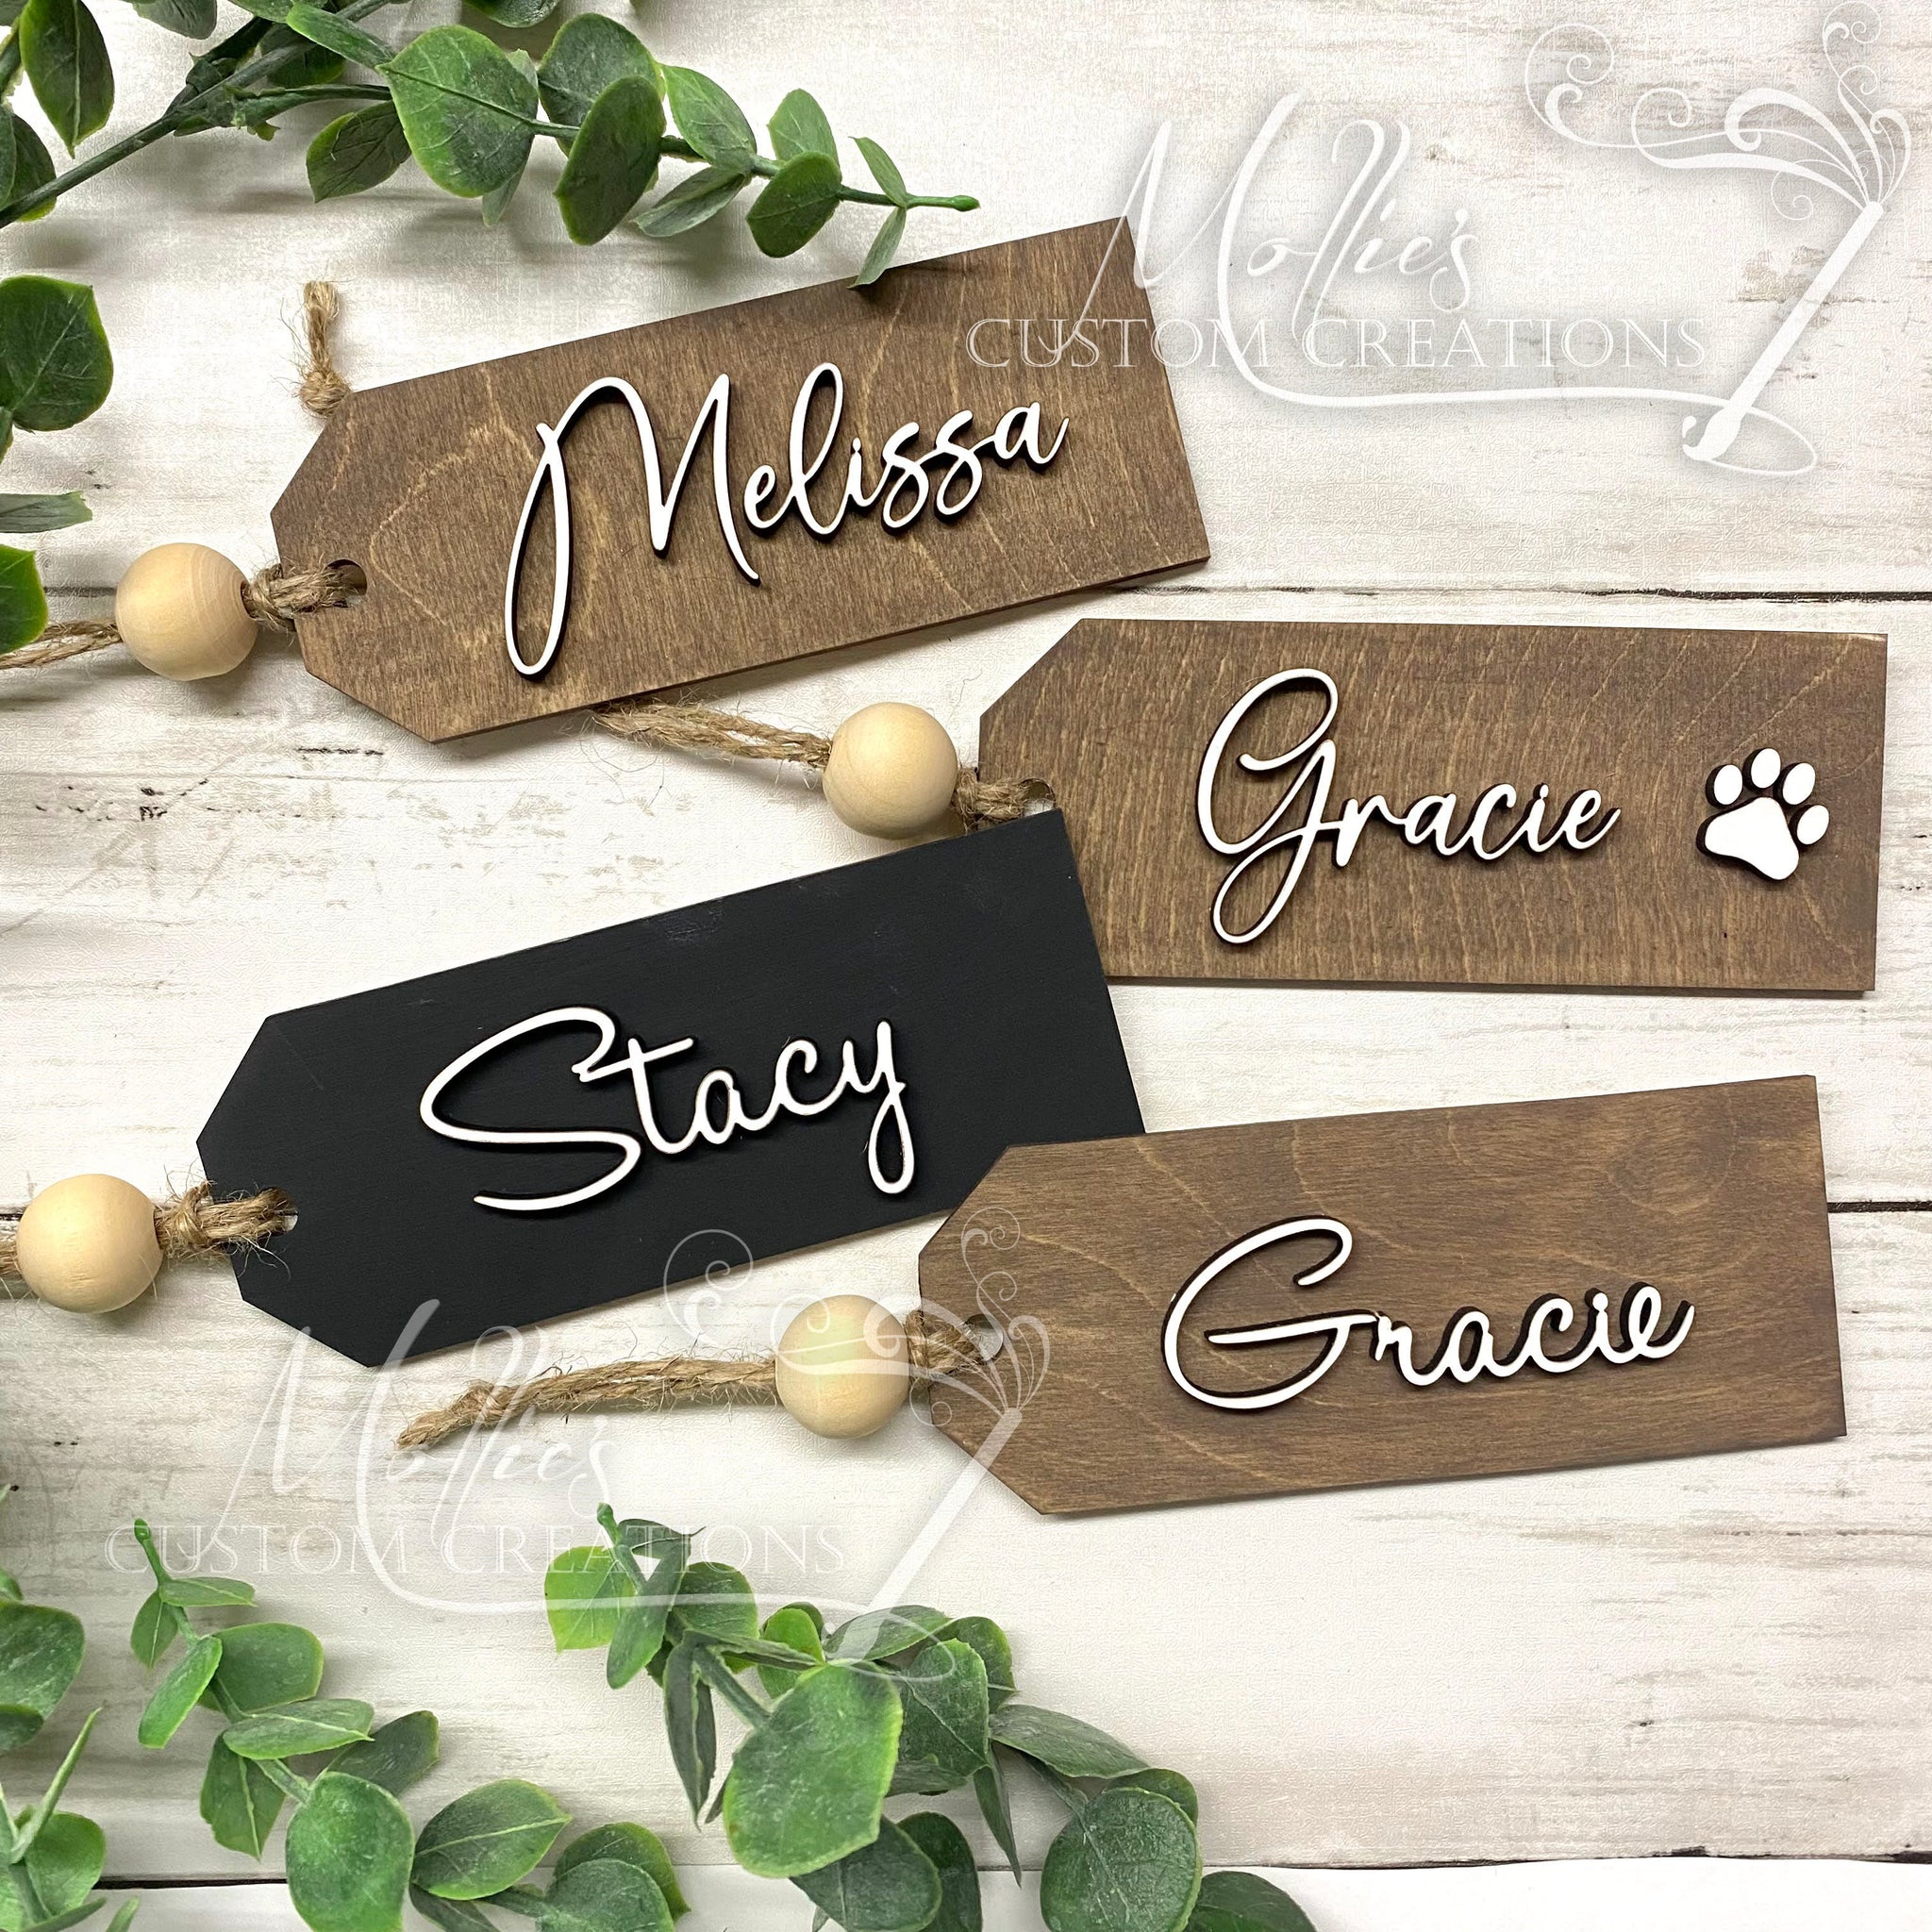 Stocking Name Tags, Personalized, Custom Wood Christmas Gift Tags